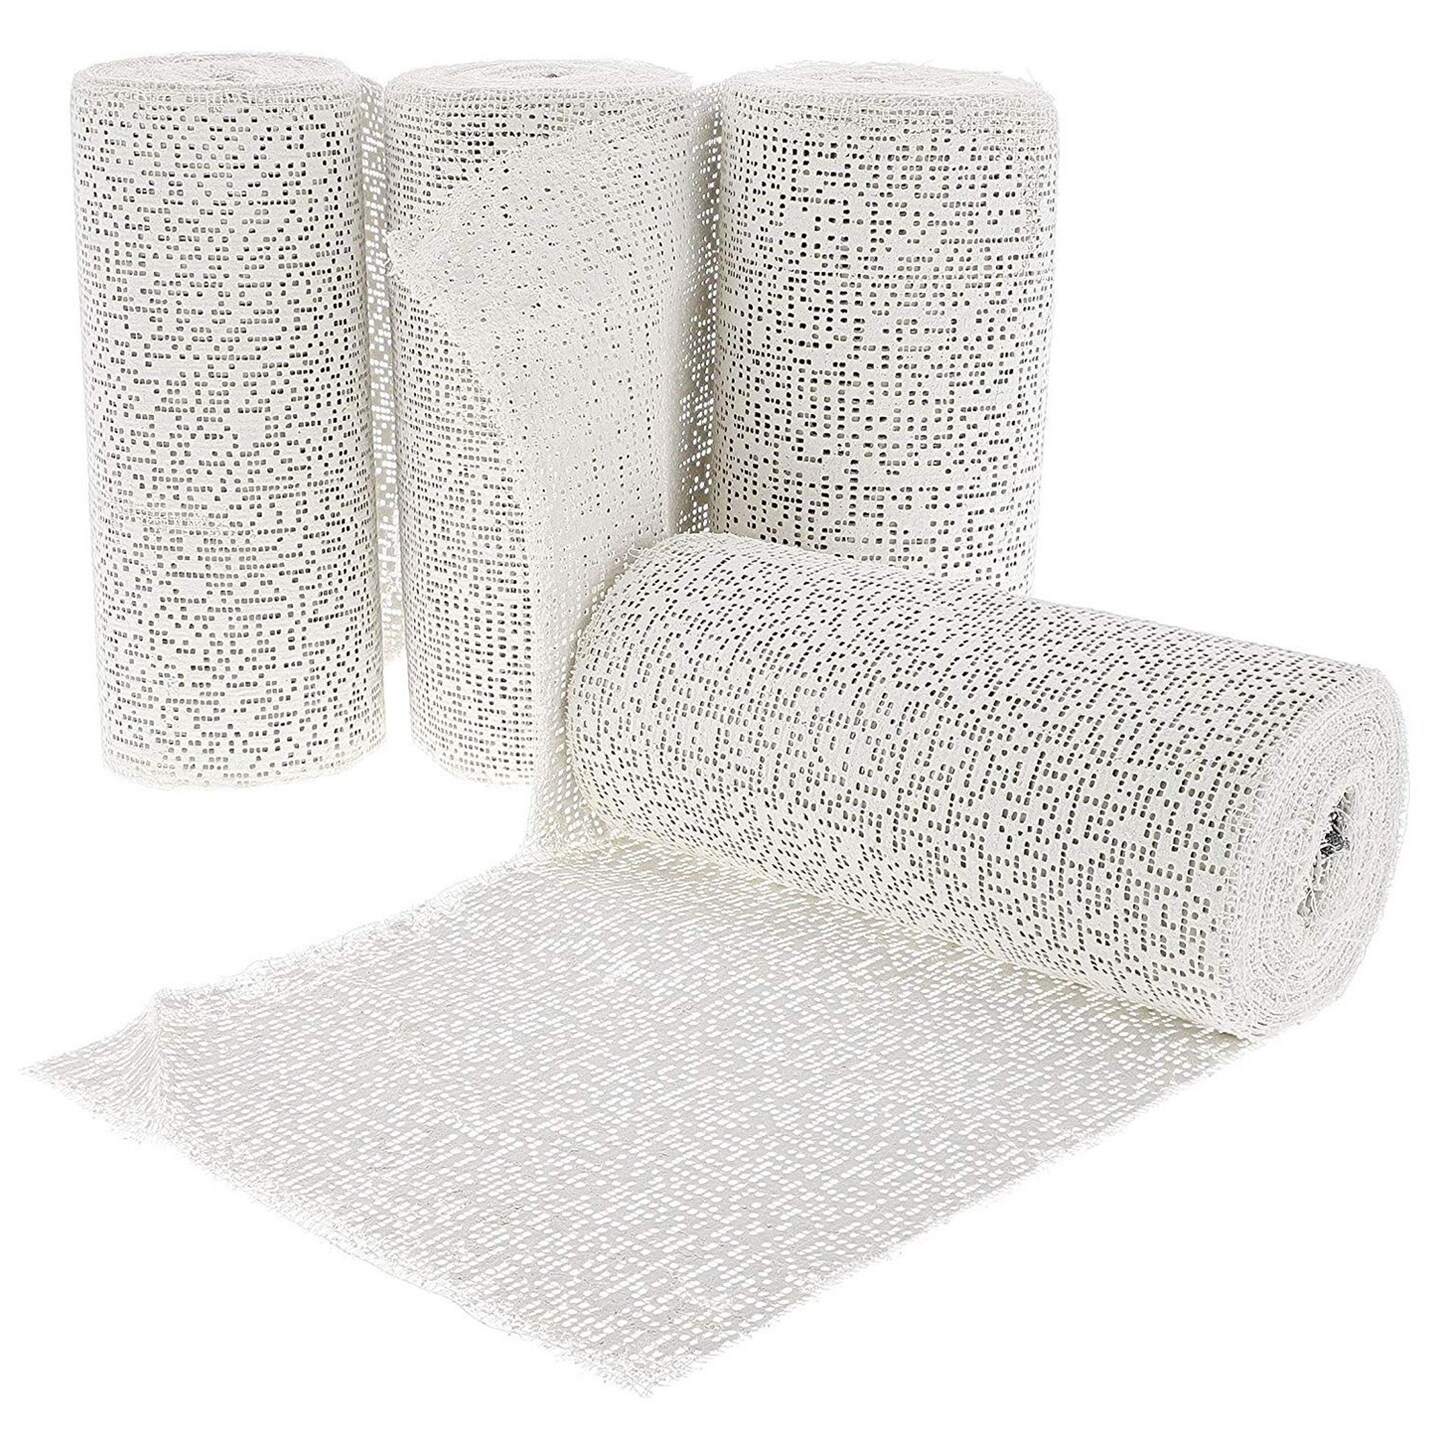 Plaster Cloth Rolls Bandages Strips Wrap Cast Material Tape For Craft  Projects Mask Making Belly Casts